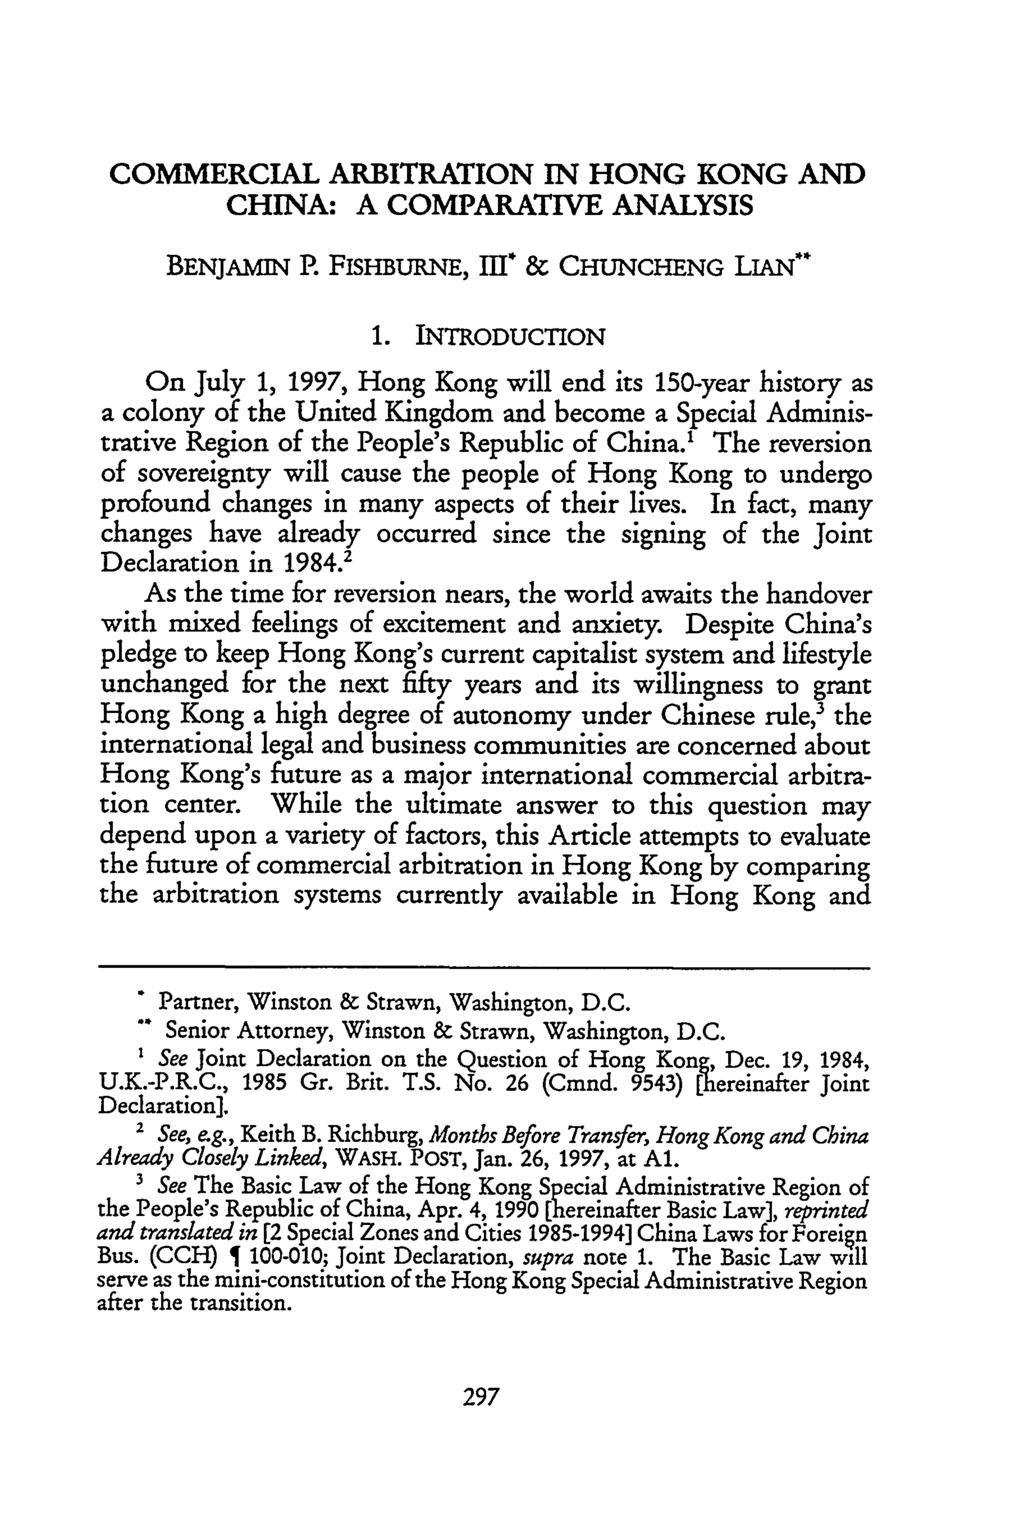 Fishburne and Lian: Commercial Arbitration in Hong Kong and China: A Comparative Anal COMMERCIAL ARBITRATION IN HONG KONG AND CHINA: A COMPARATIVE ANALYSIS BENJAMIN P.